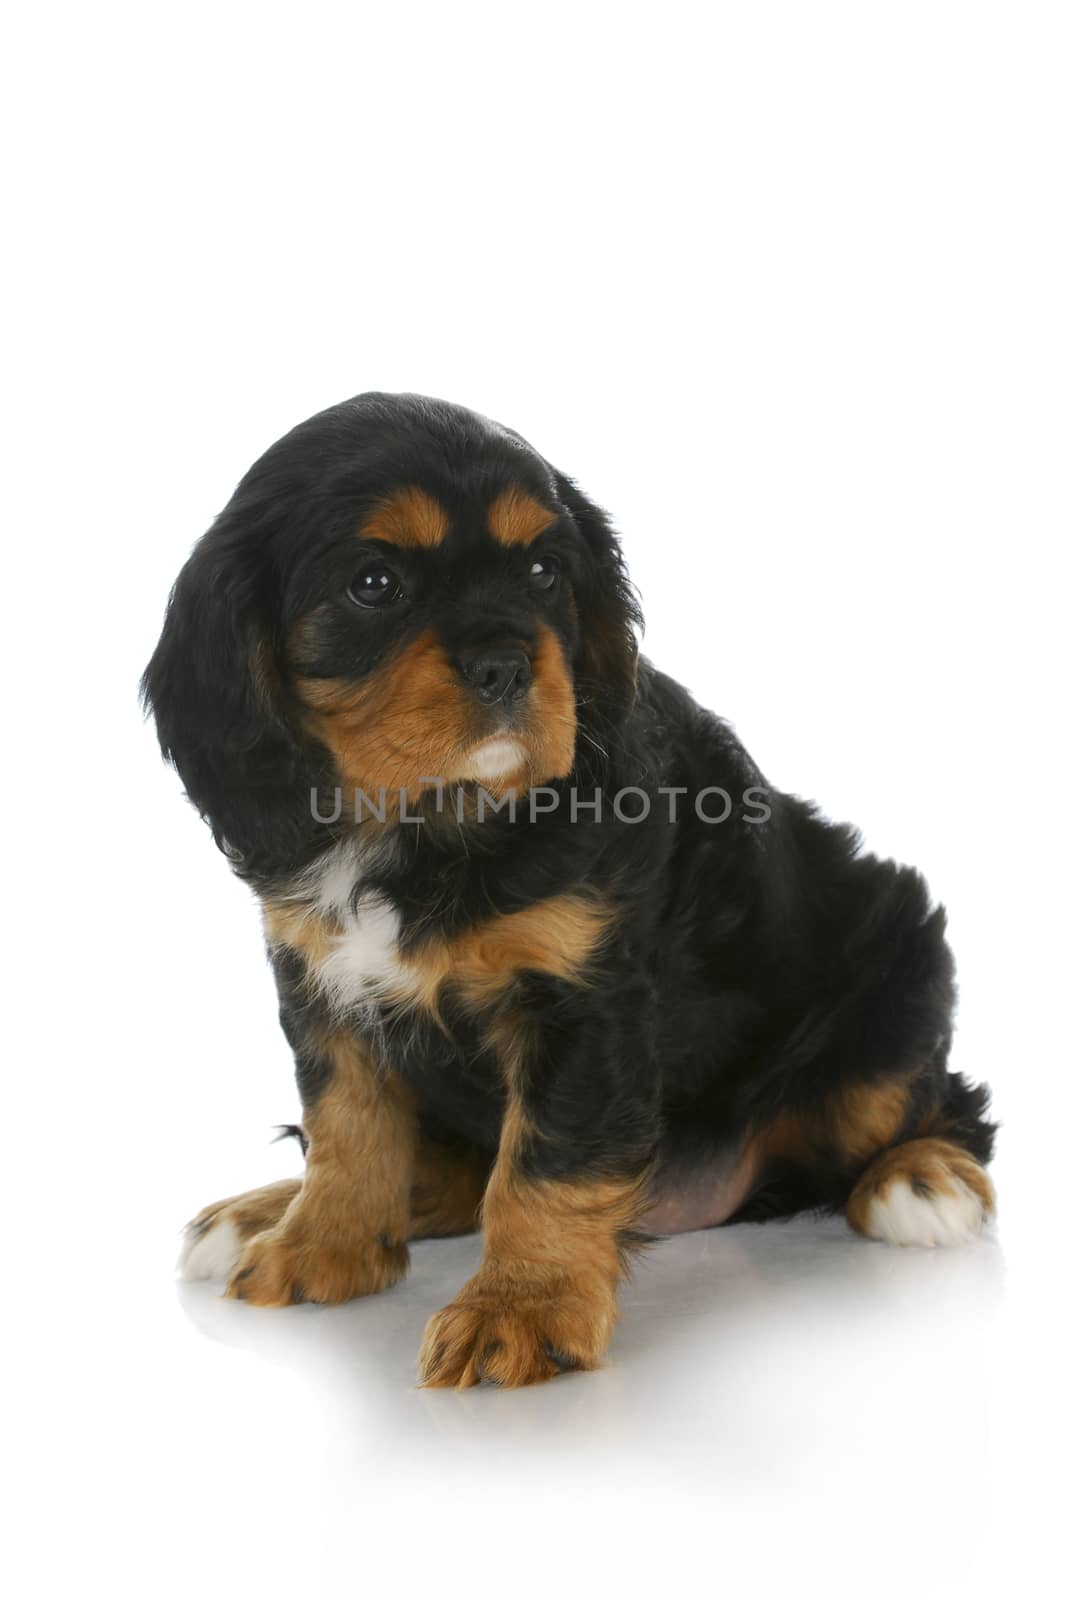 cute puppy - black and tan cavalier king charles spaniel puppy looking off to the side - 6 weeks old